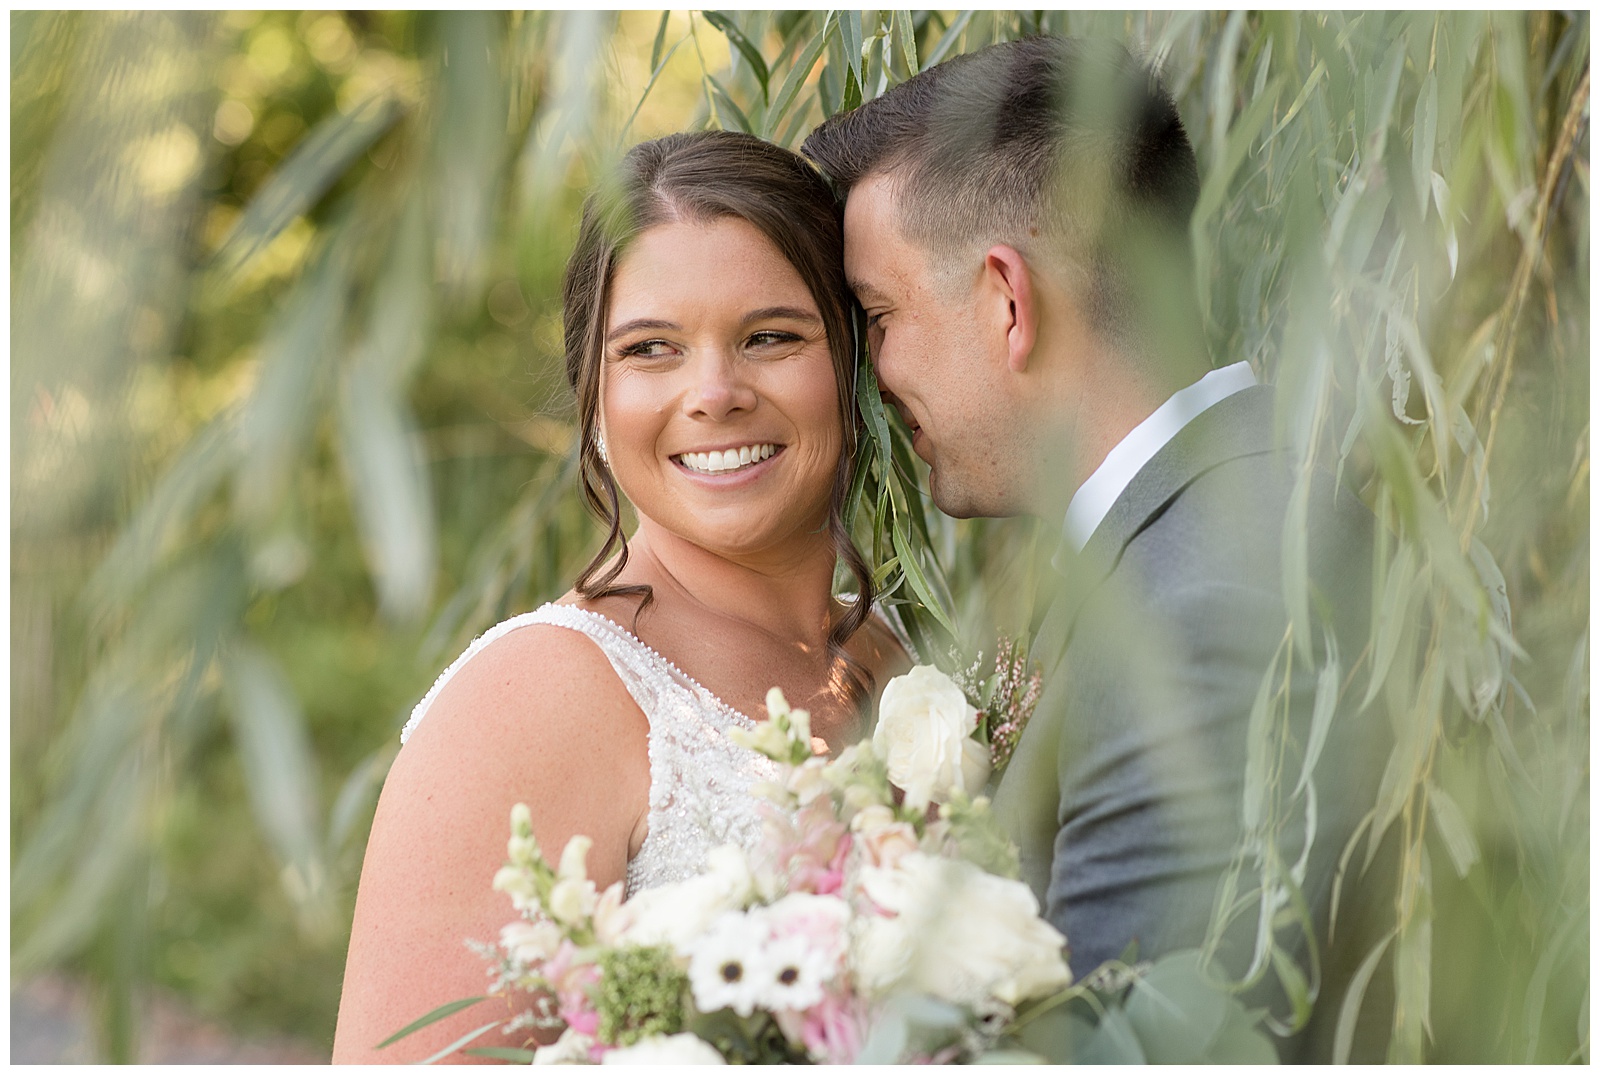 close up photo of bride smiling and looking right as her groom nuzzles into her left cheek under willow tree in harrisburg pennsylvania